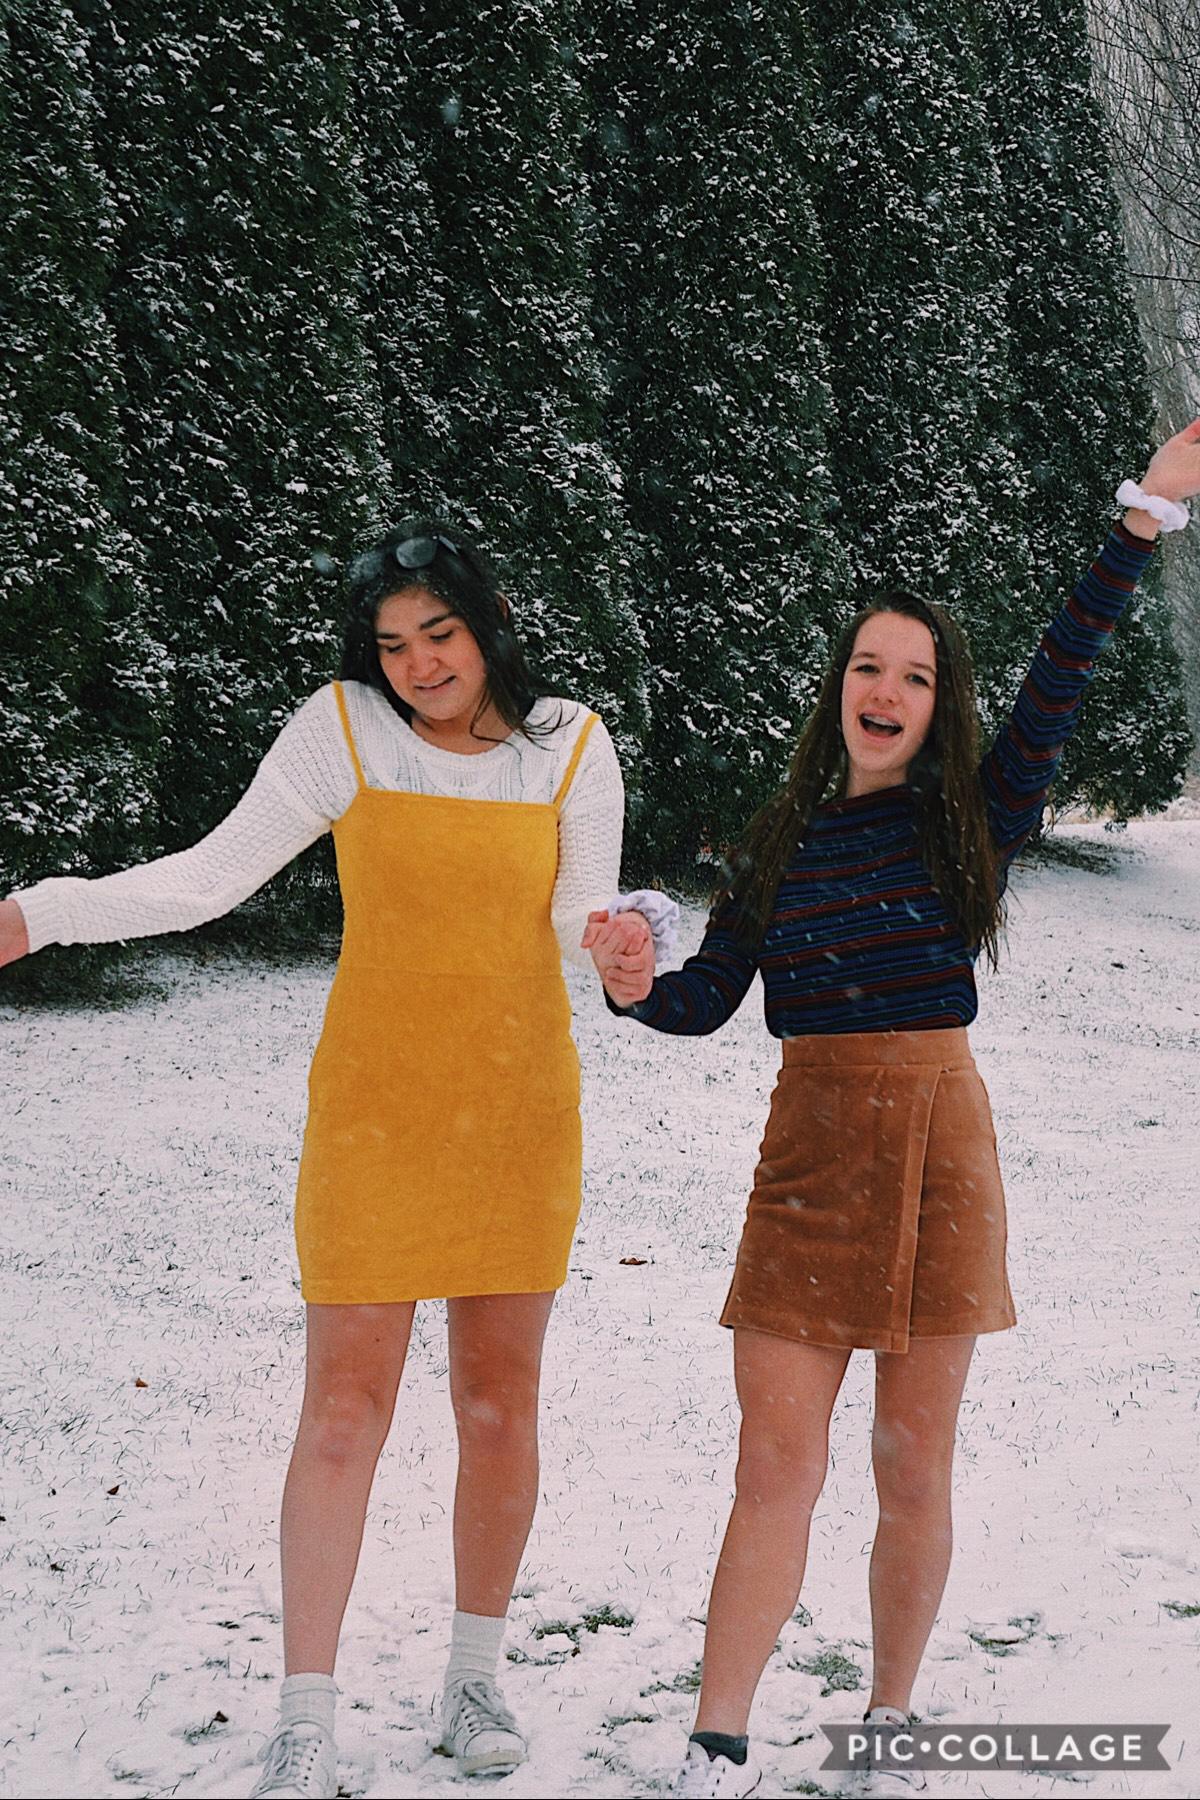 we literally carried out my big tripod all the way behind my backyard & literally froze to death trying to take it,...but with her: it was a fun adventure 